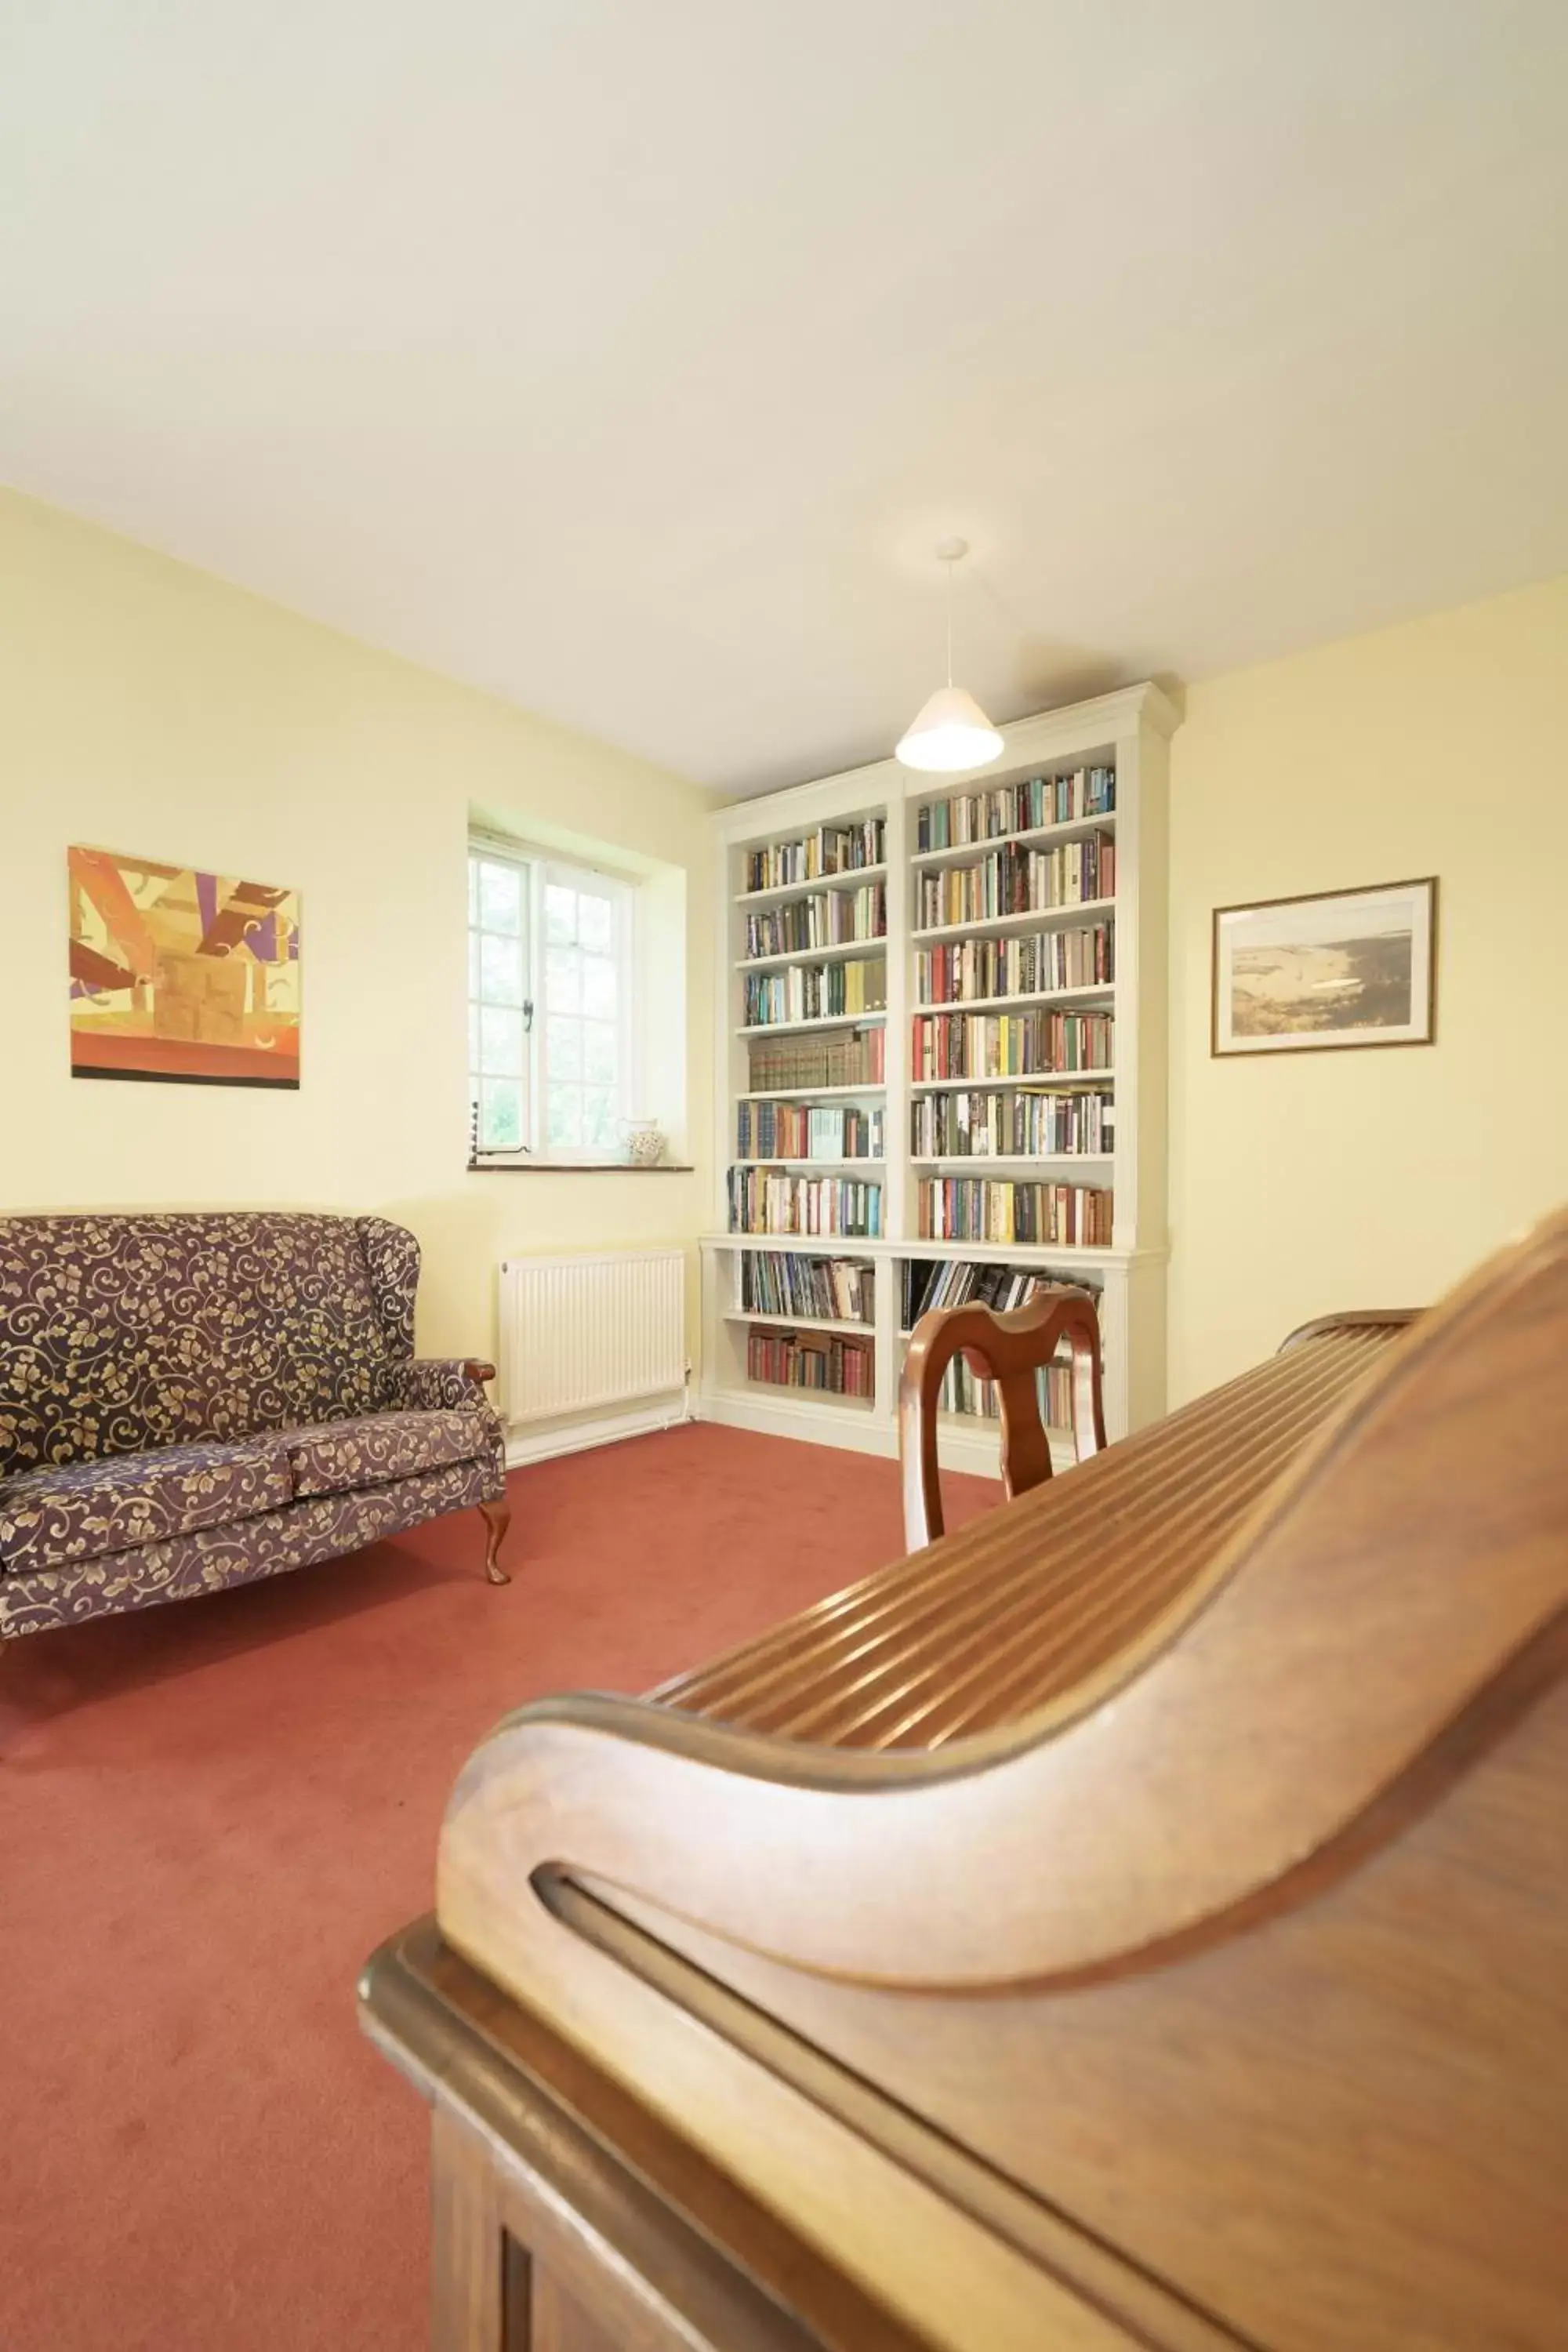 Library in Sarum College